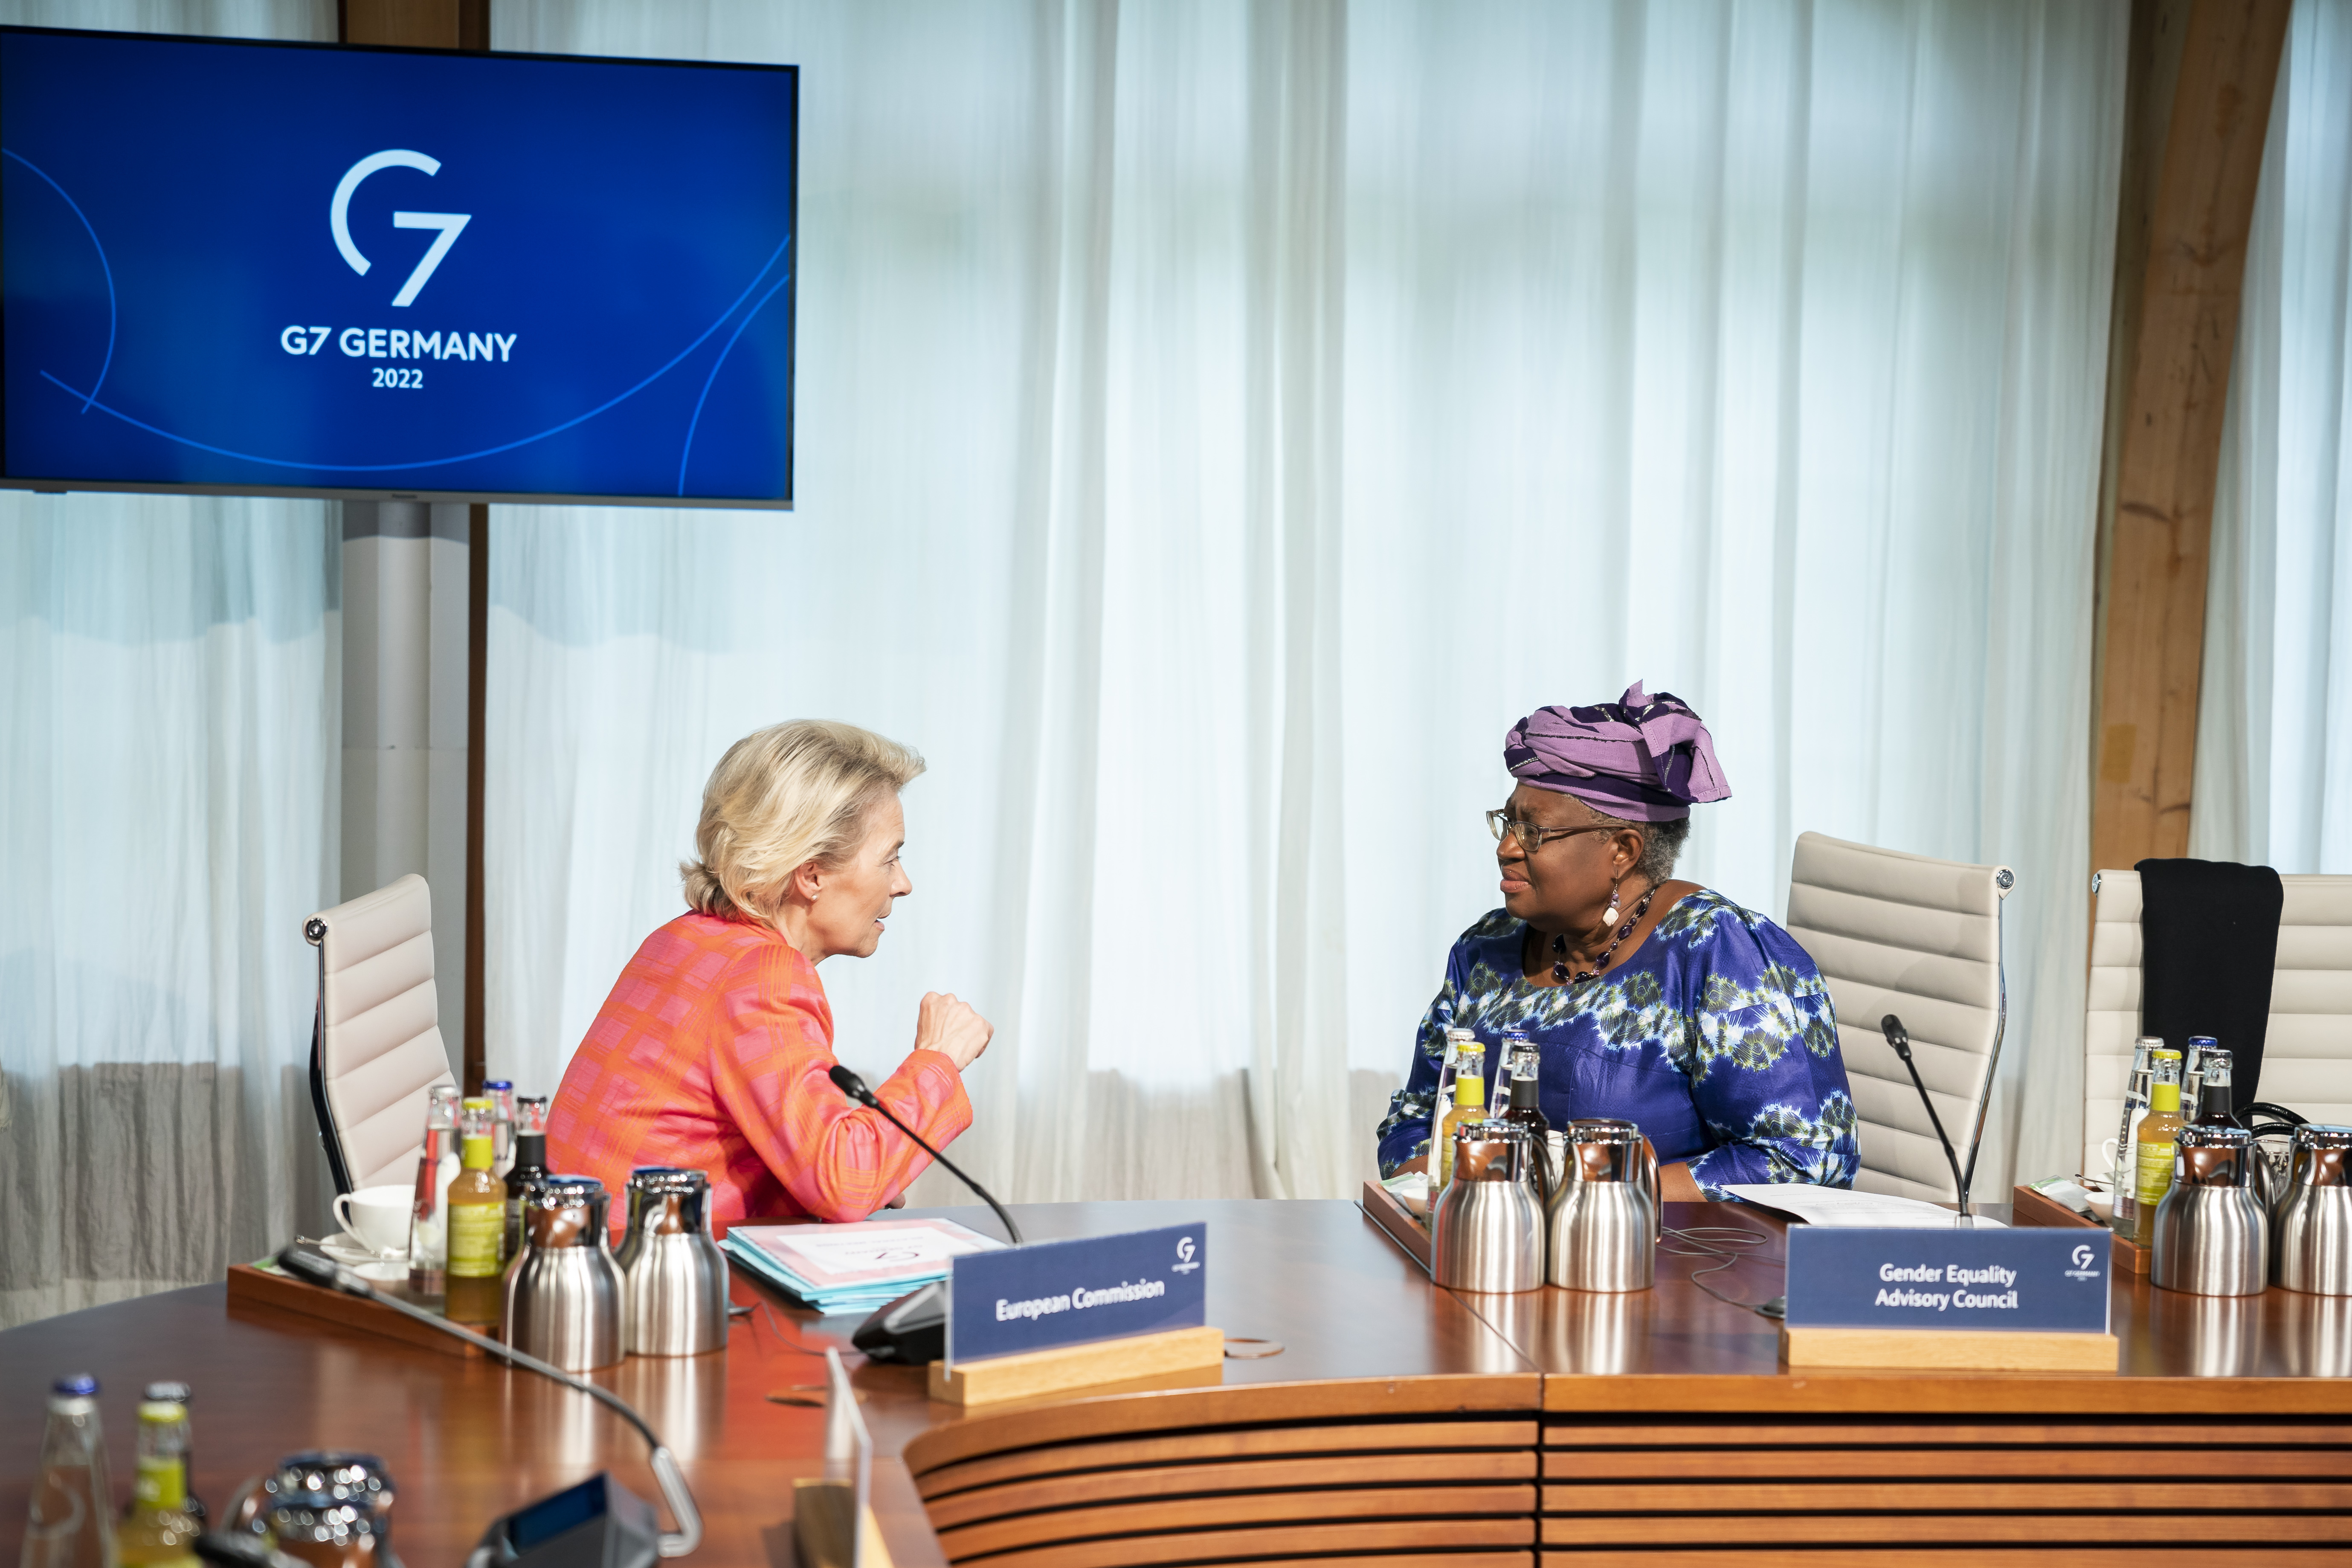 European Commission President Ursula von der Leyen talks with Ngozi Okonjo-Iweala, Director-General of the World Trade Organization (WTO), before the sixth working session begins.